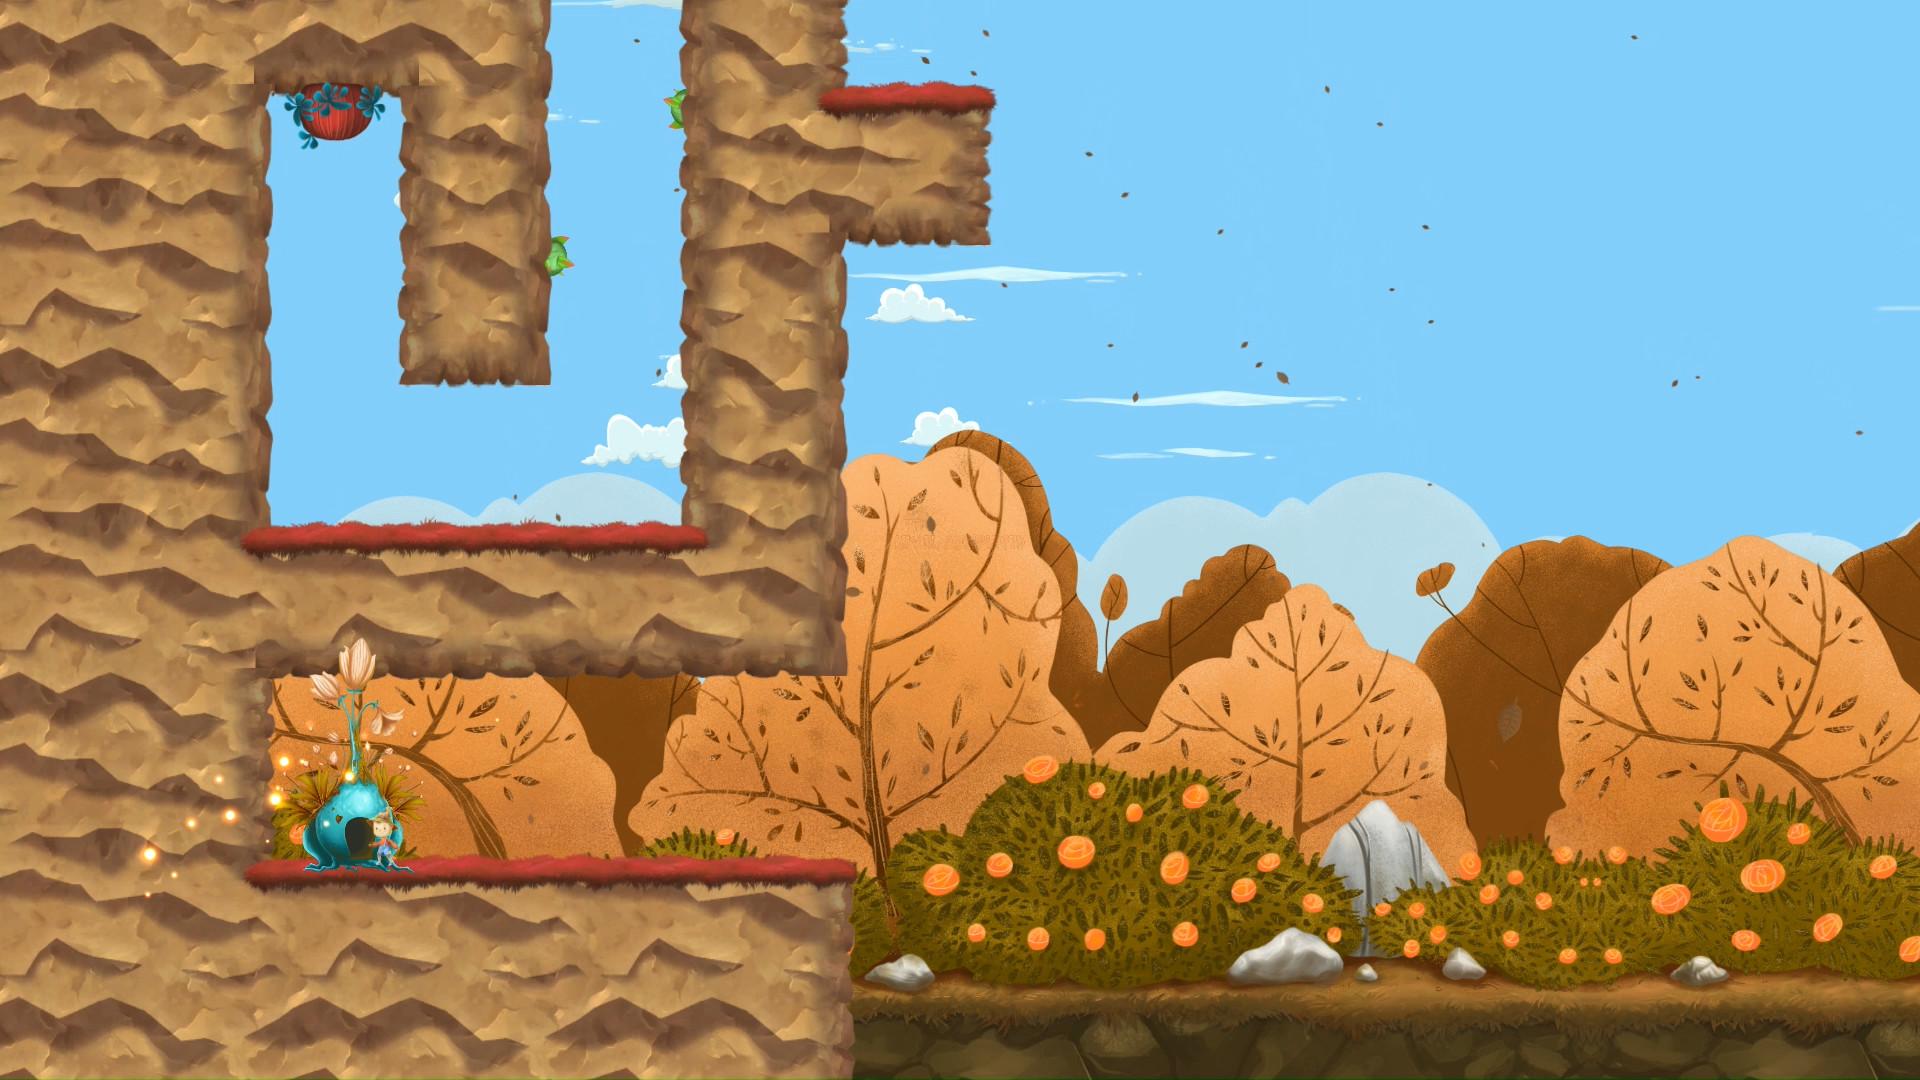 Screenshot №10 from game Upside Down